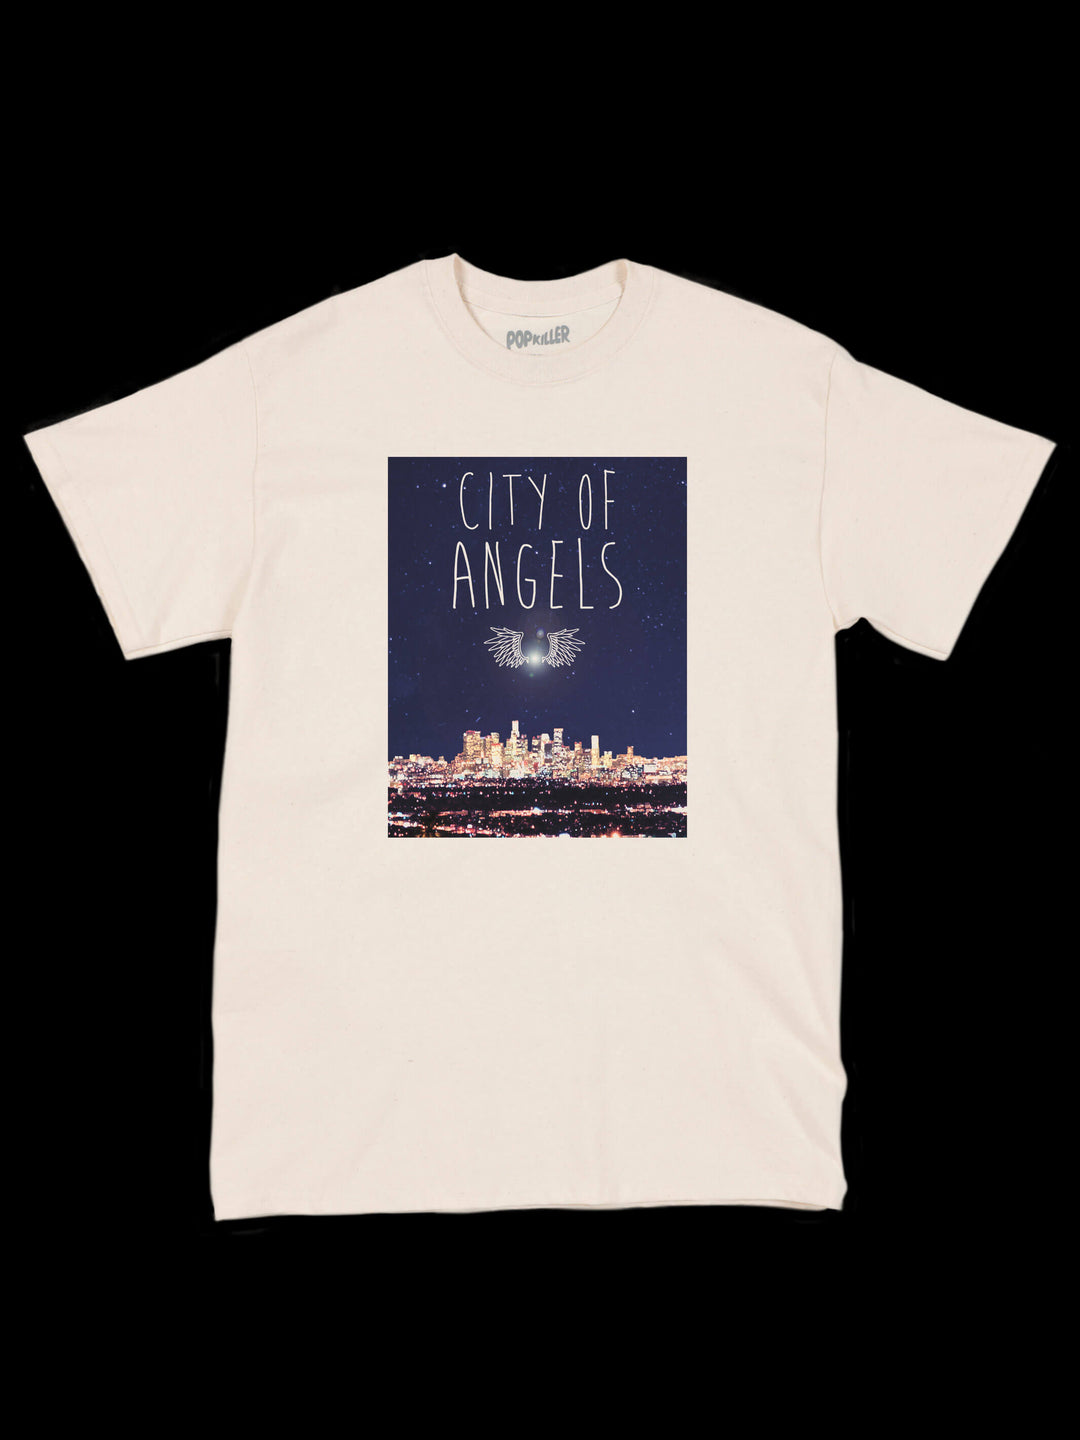 Los Angeles Lettering Graphic T-Shirt